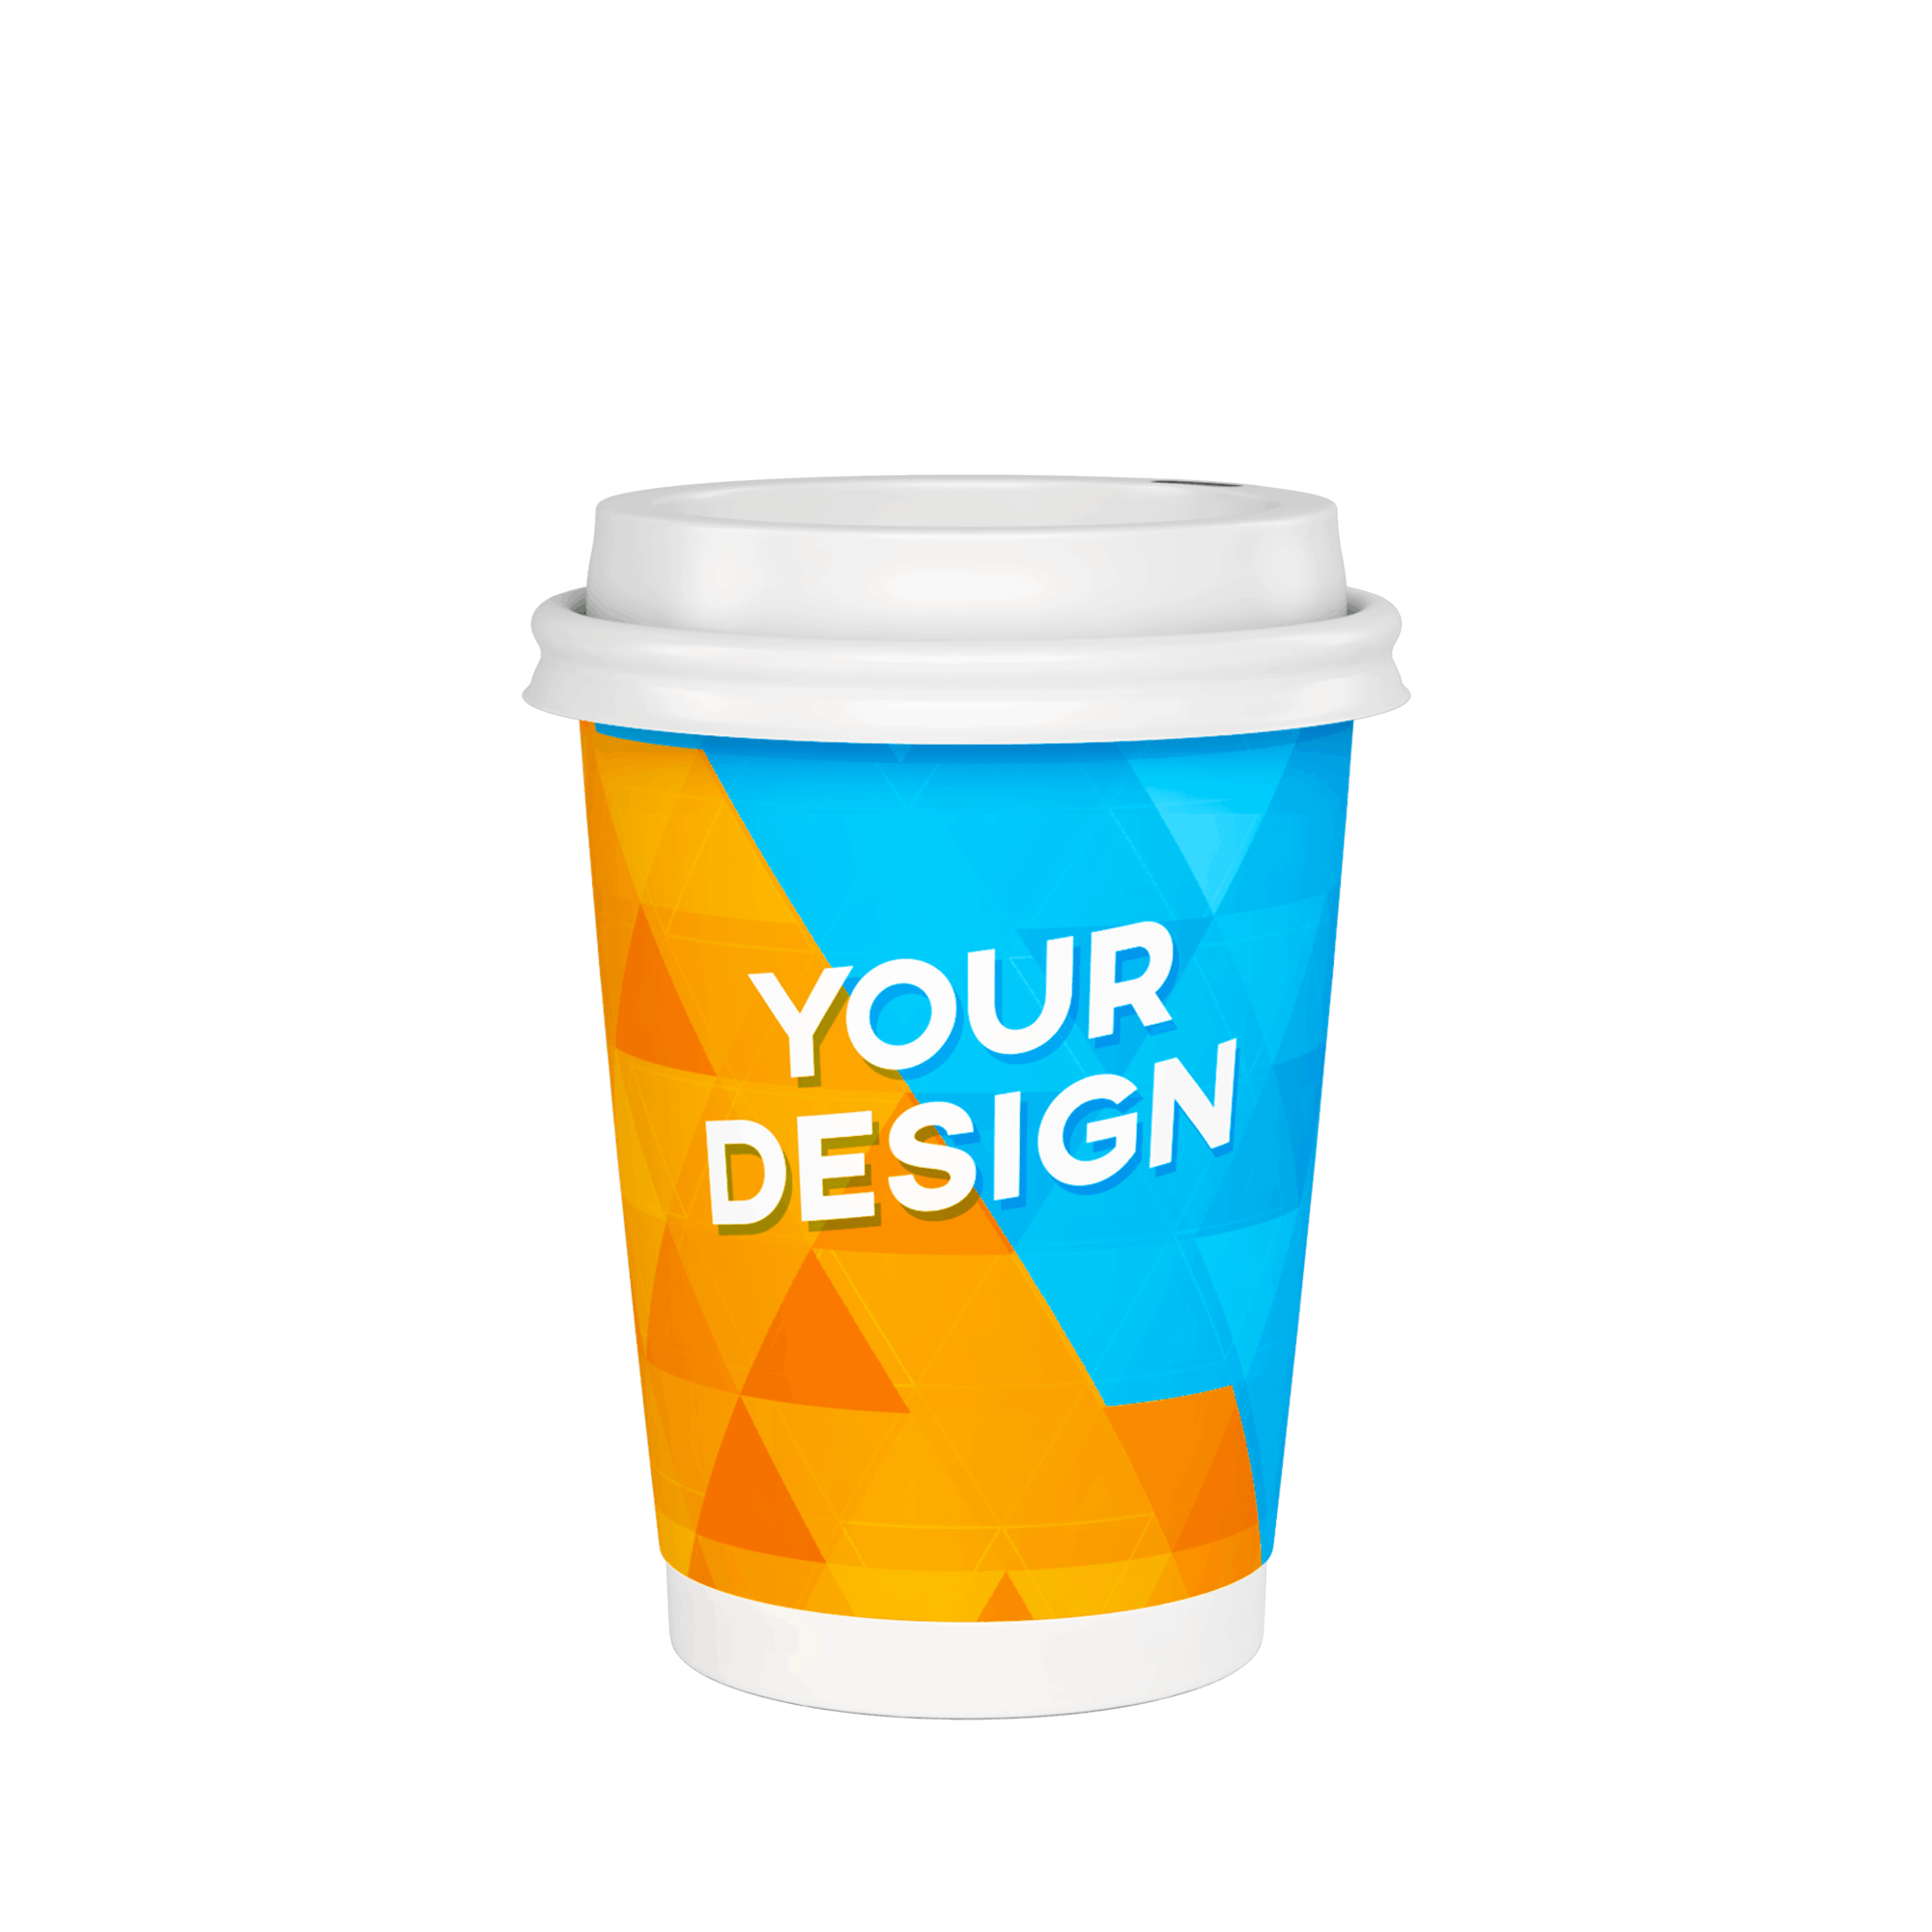 Customized double wall paper cups. Size - 8oz (240ml) and 12oz